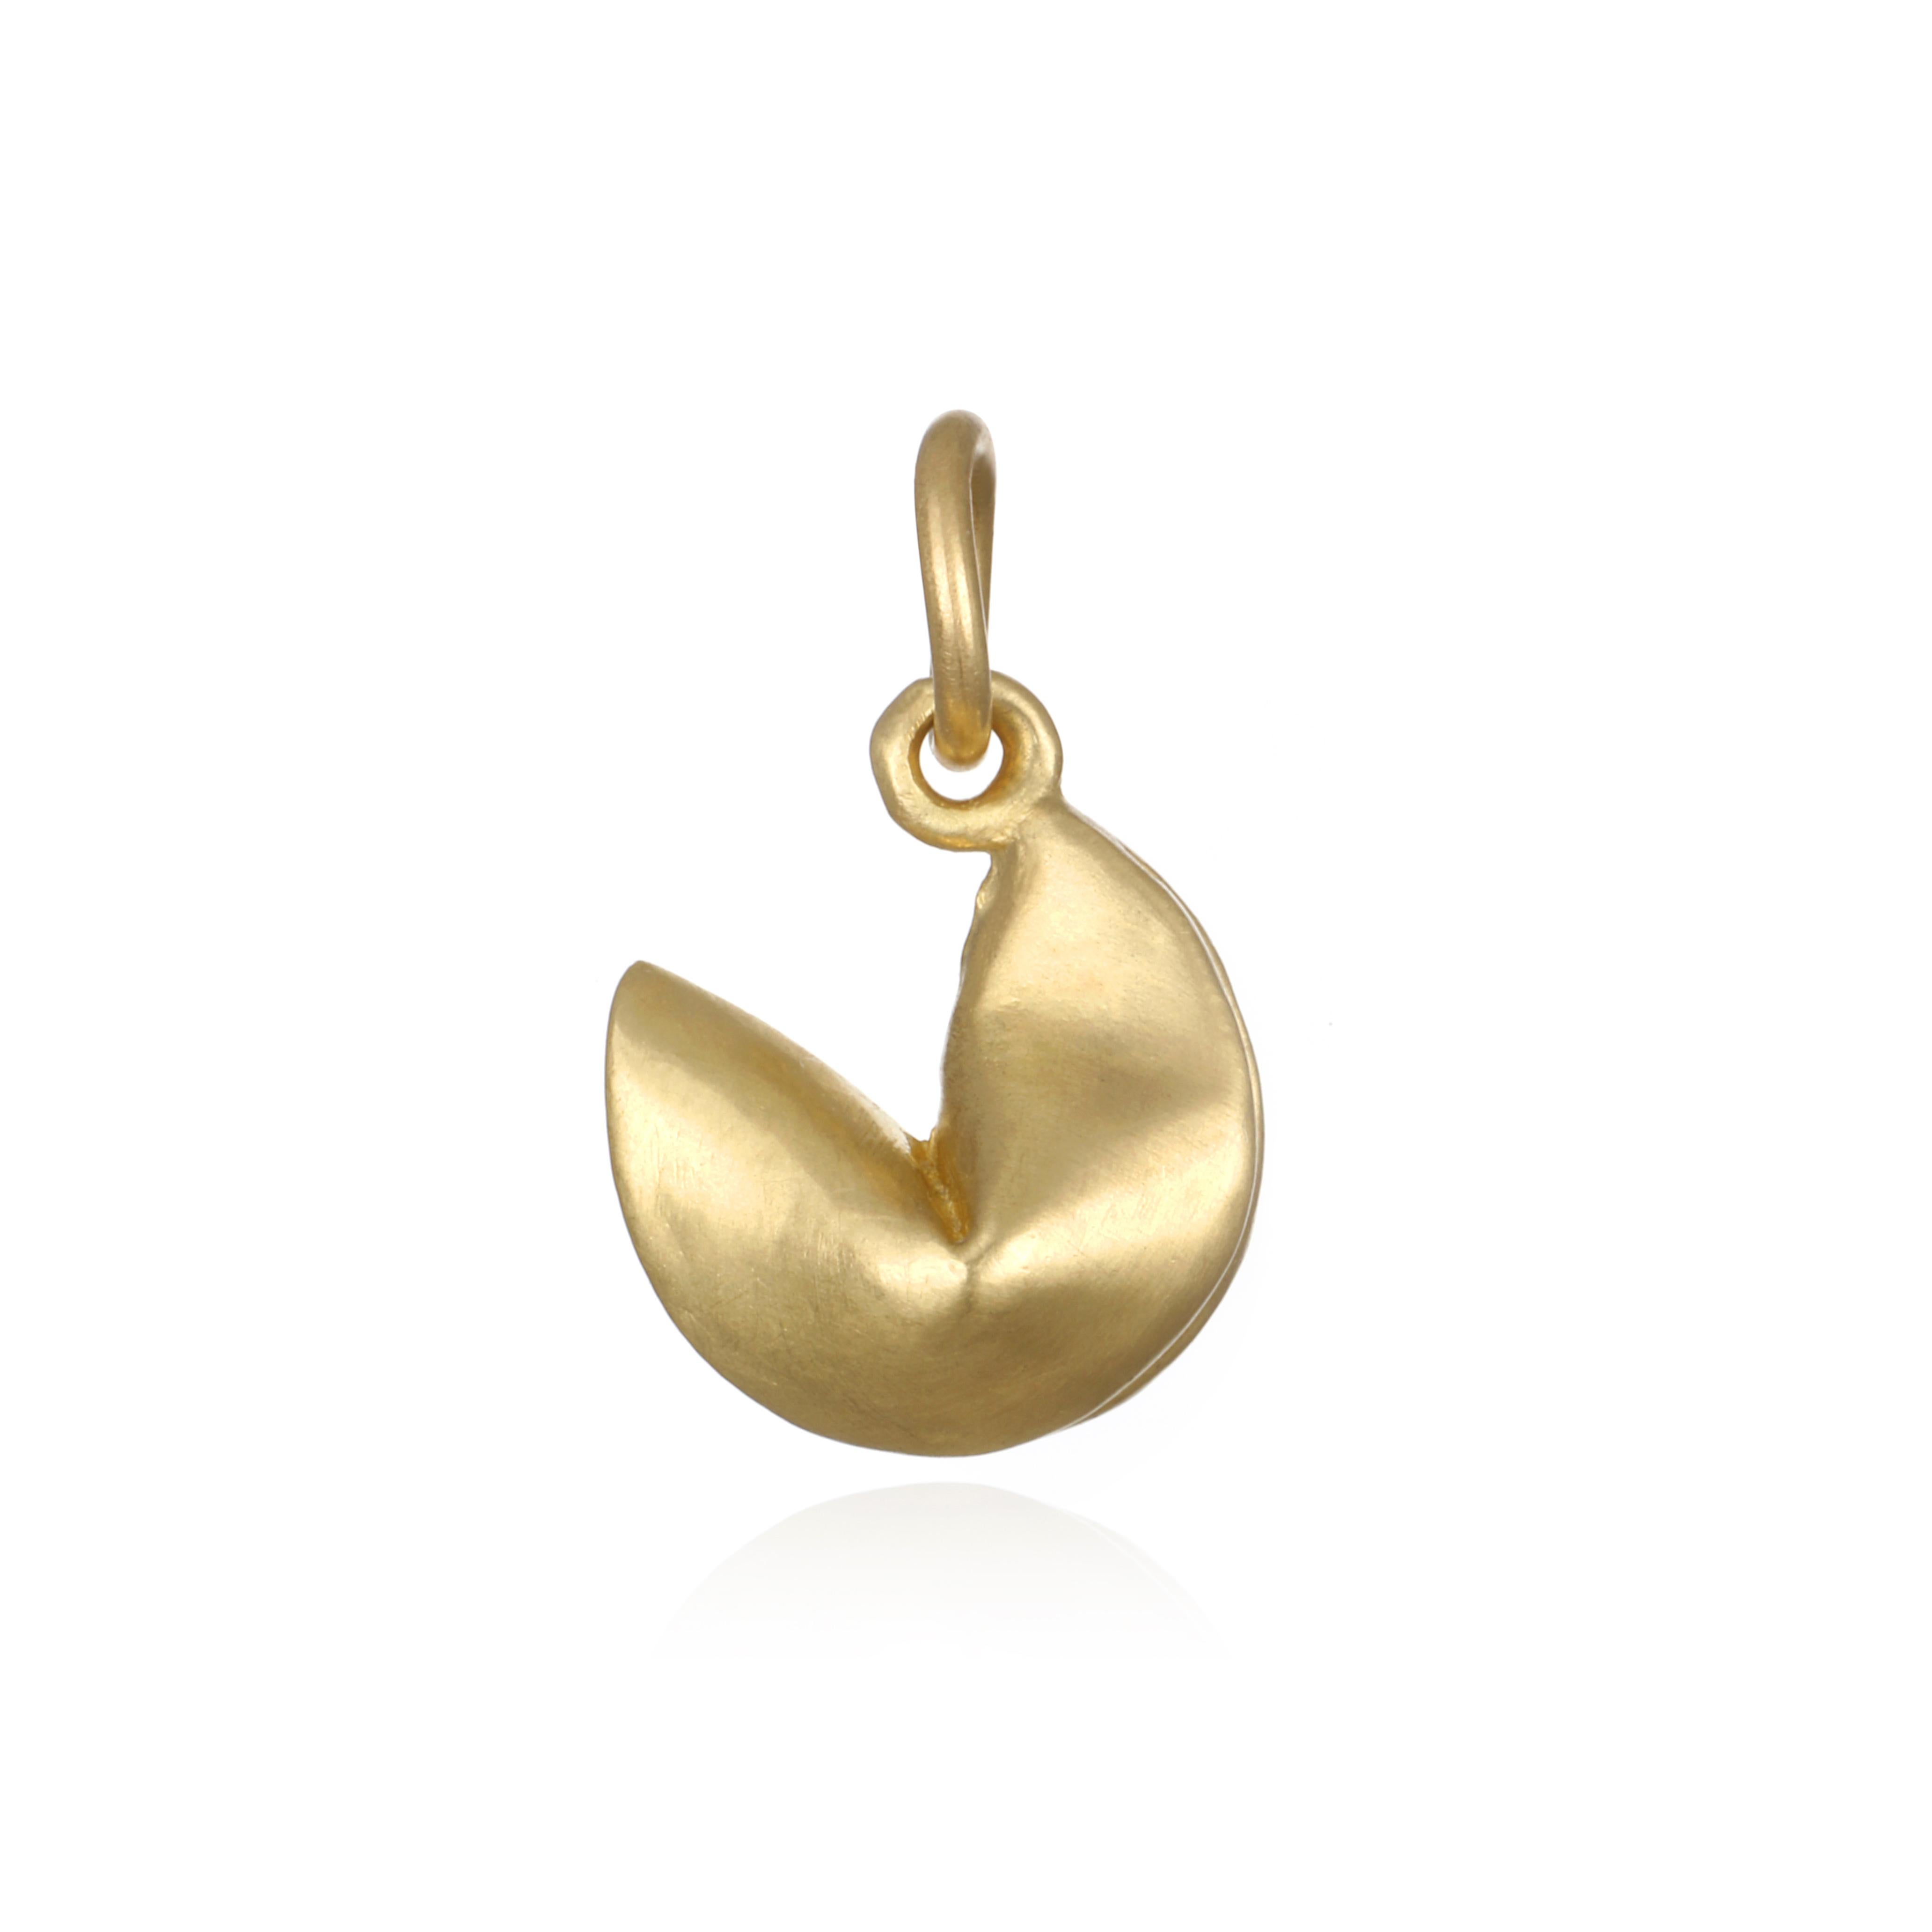 For Good Fortune! Faye Kim's solid 18K green gold fortune cookie charm symbolizes prosperity, luck, and good fortune. 

Cable Chain = 16-18